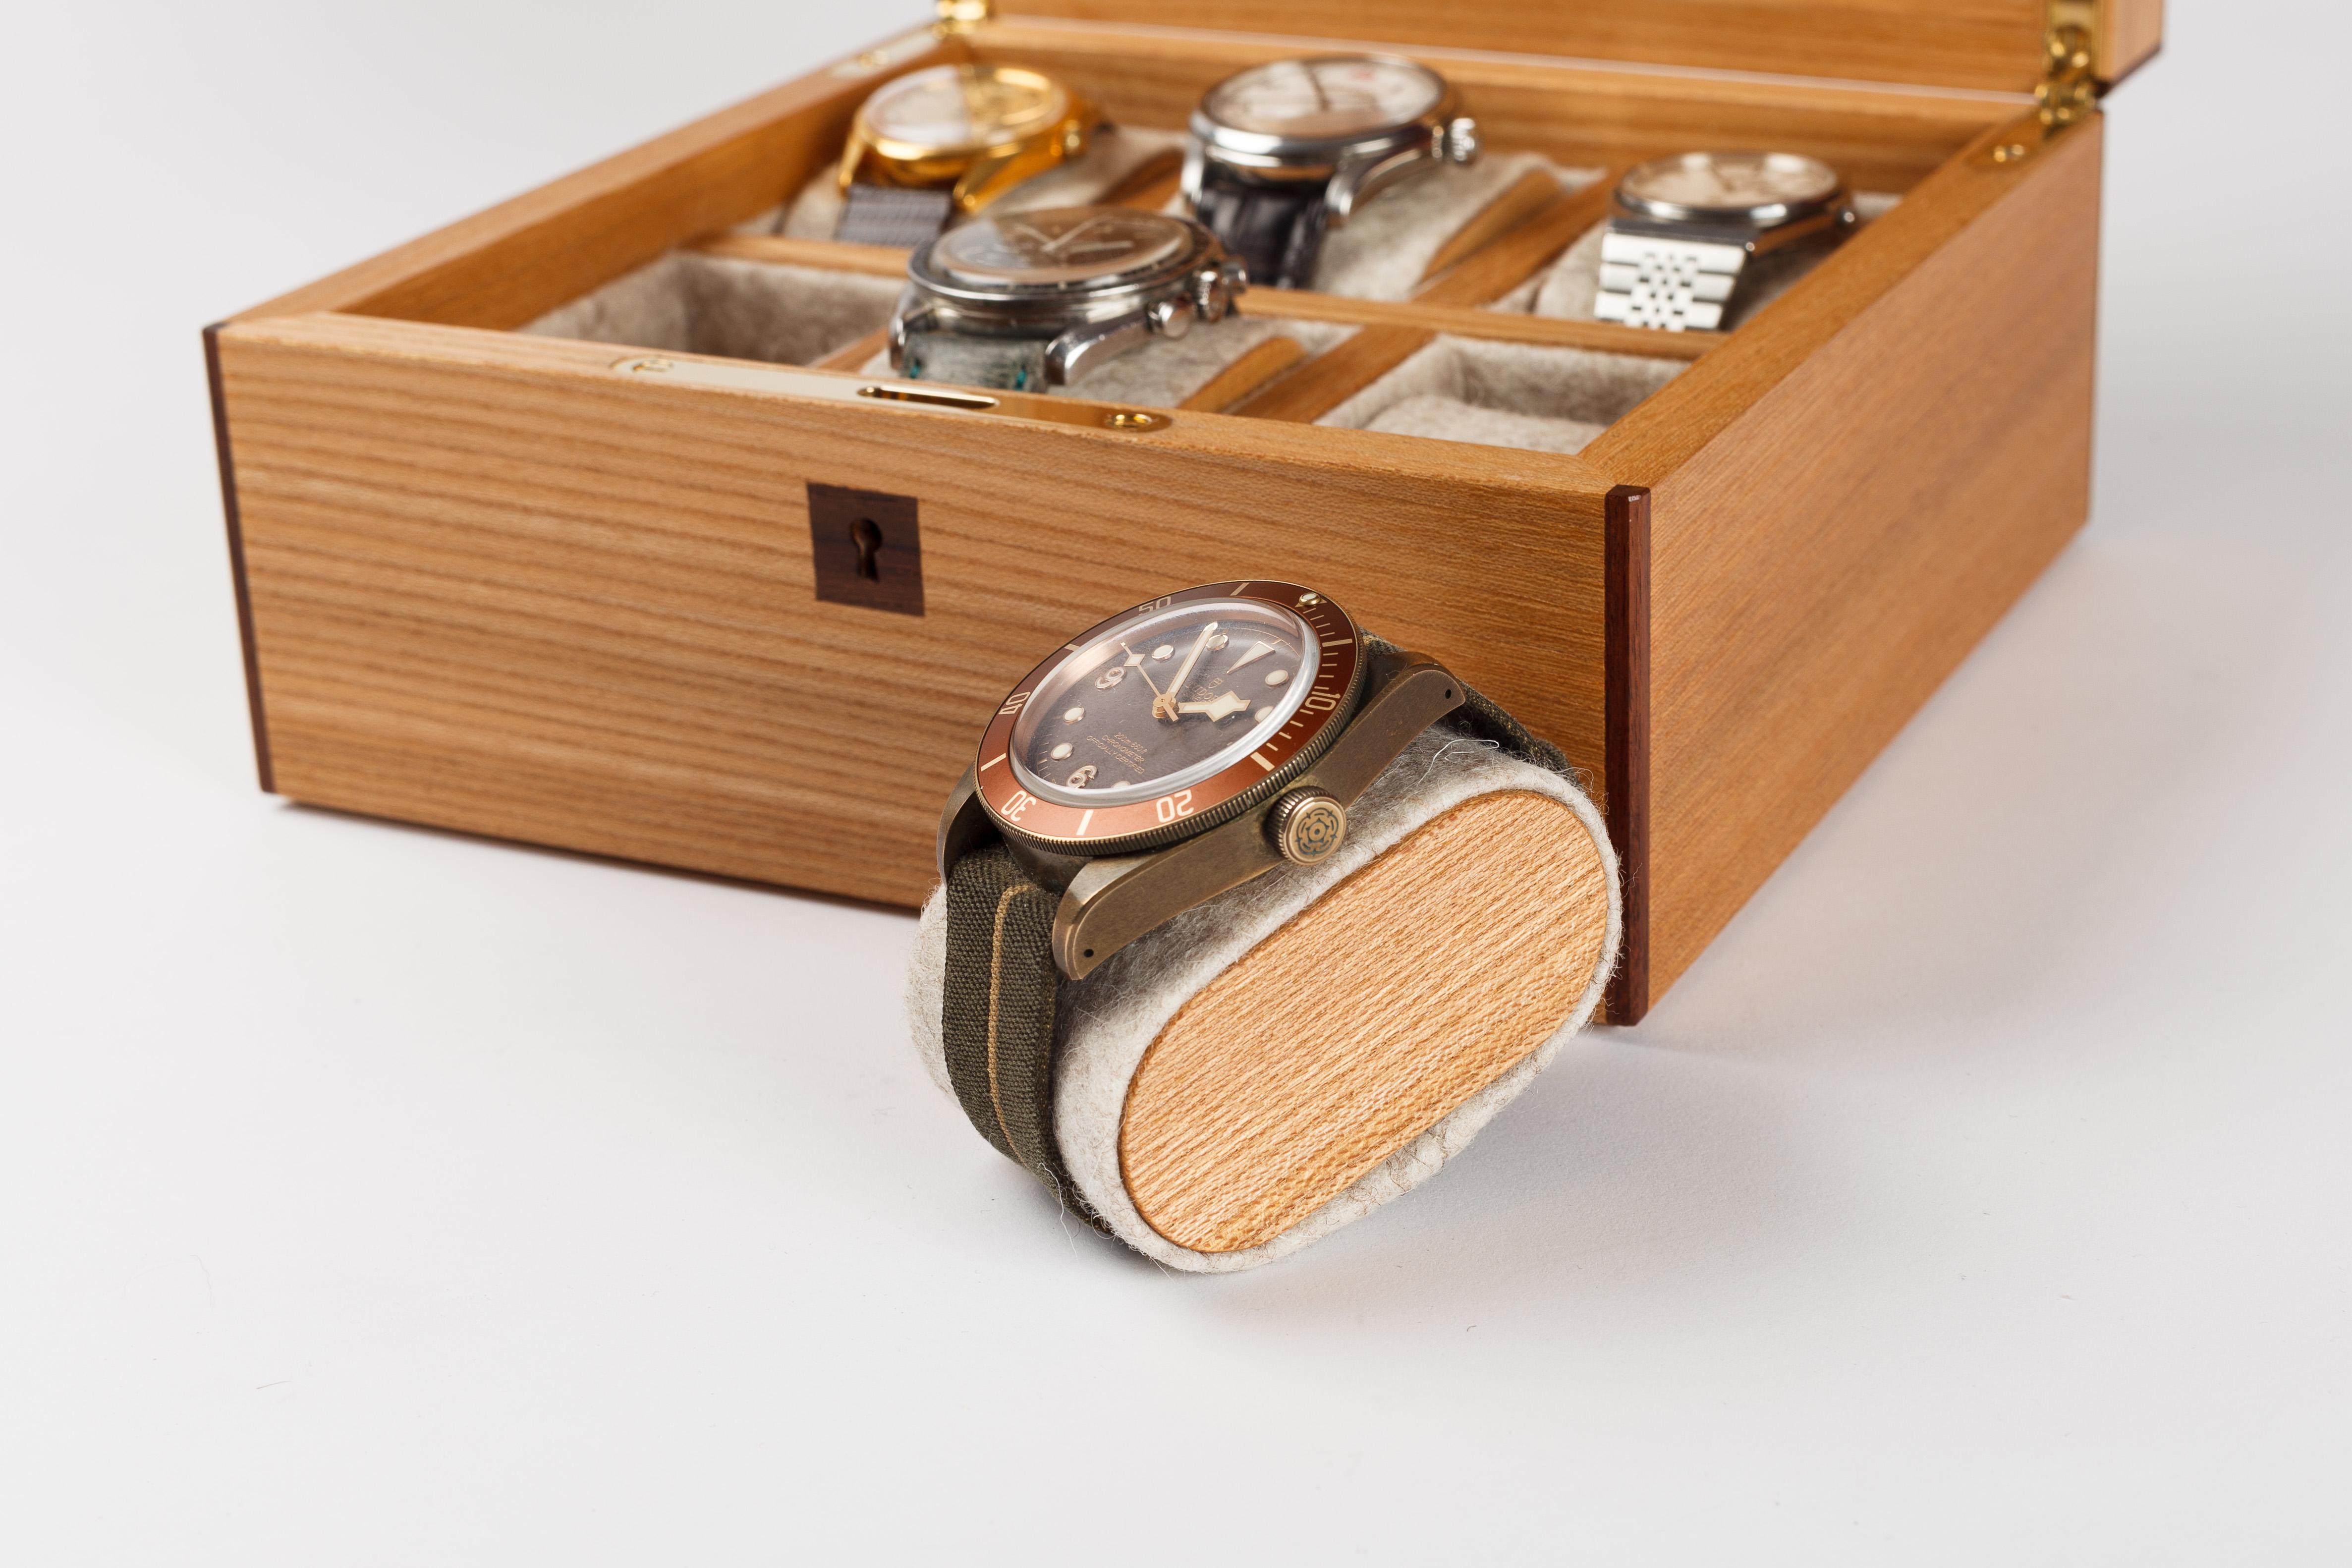 6 Watch box in Scottish elm, with a hand cut parquetry lid in ripple maple and walnut in a basket weave pattern inspired by guilloche watch dials. The box is finished with solid rosewood edge banding and beautifully figured ripple sycamore on the